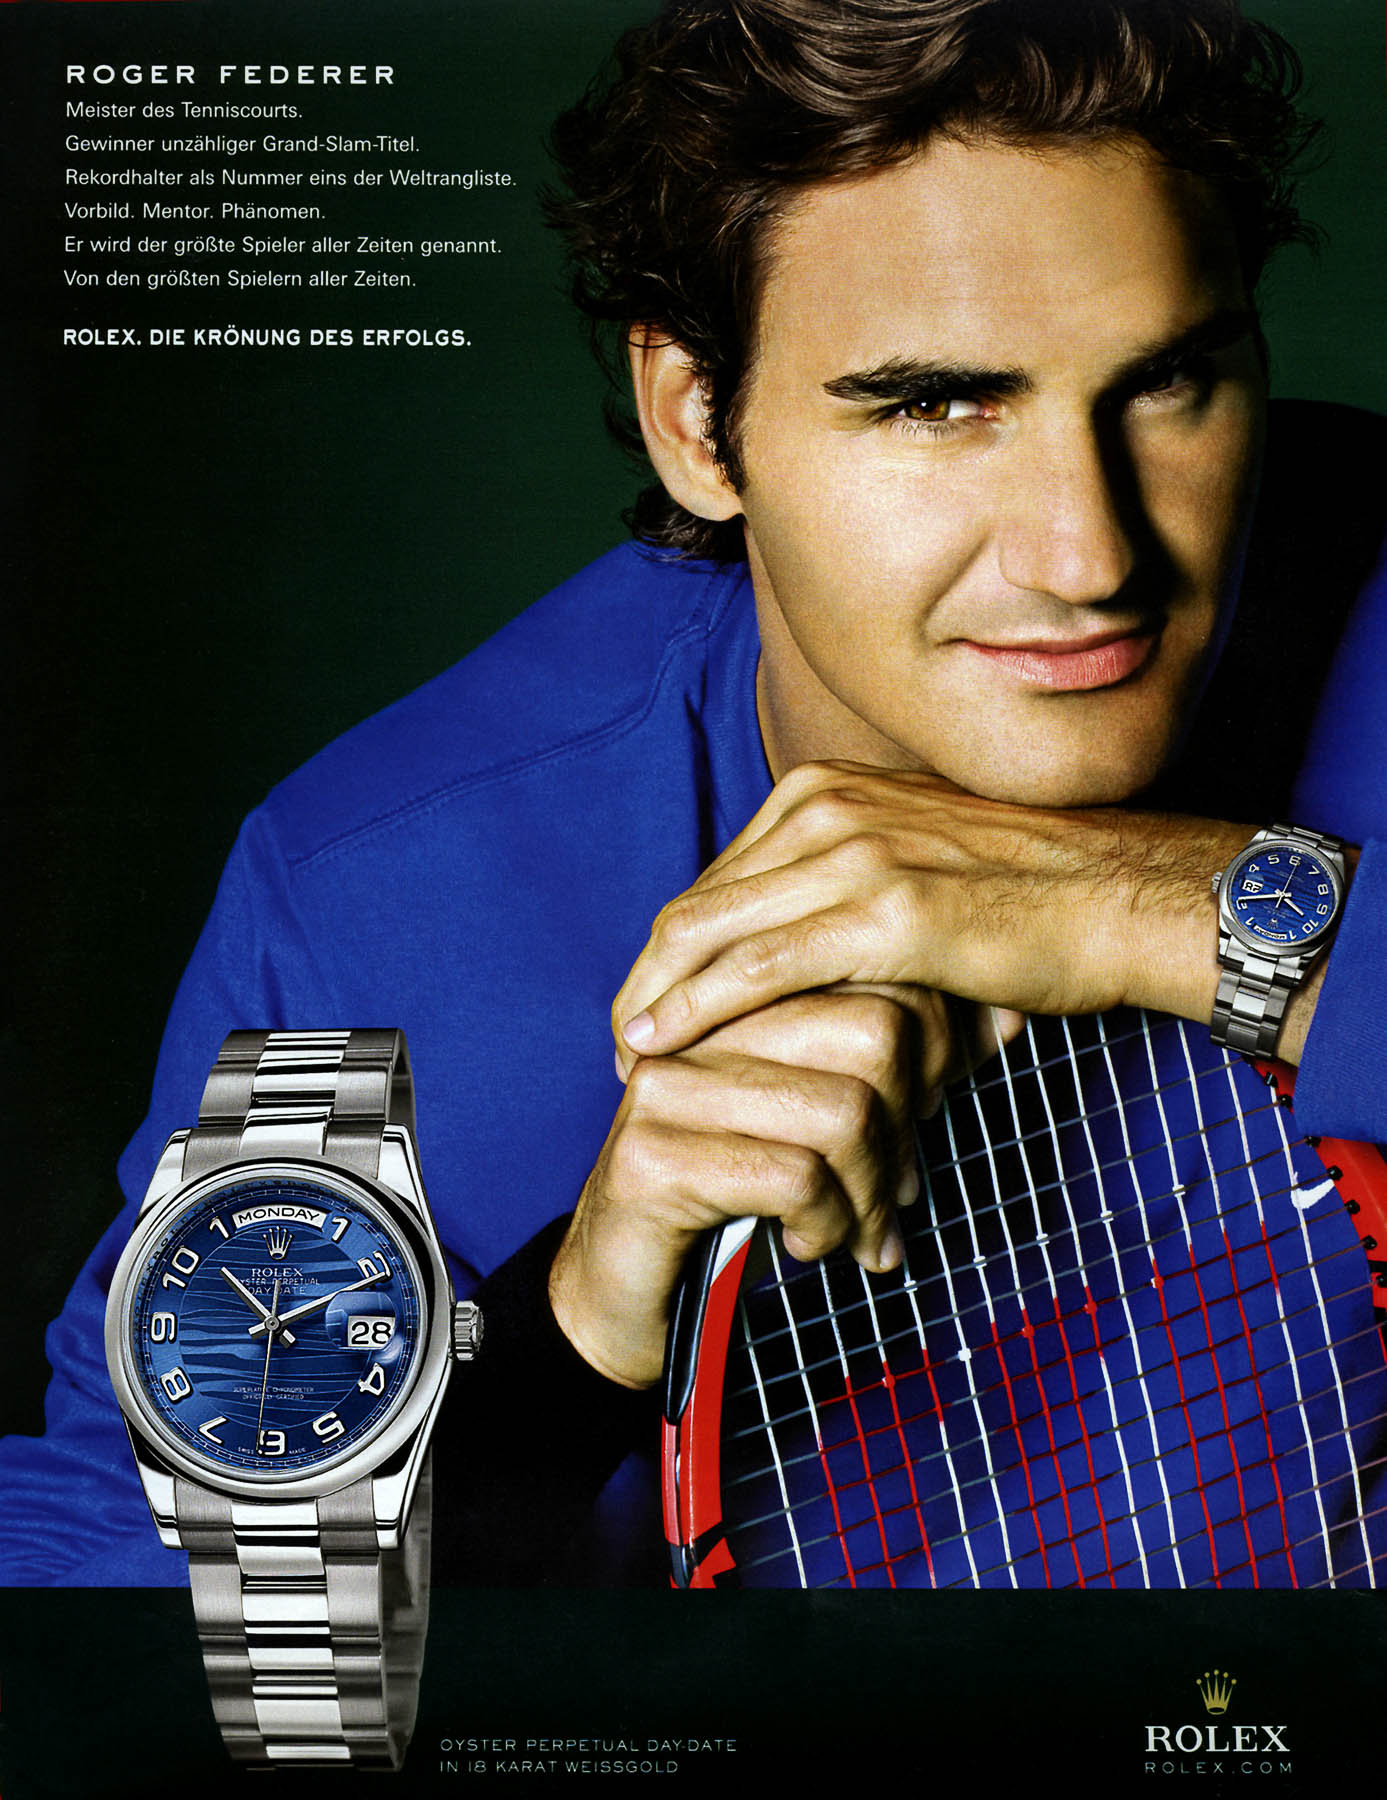 , Inside Roger’s Federer’s amazing life – winning 20 Grand Slams, living in stunning mansions and happy 13-year marriage